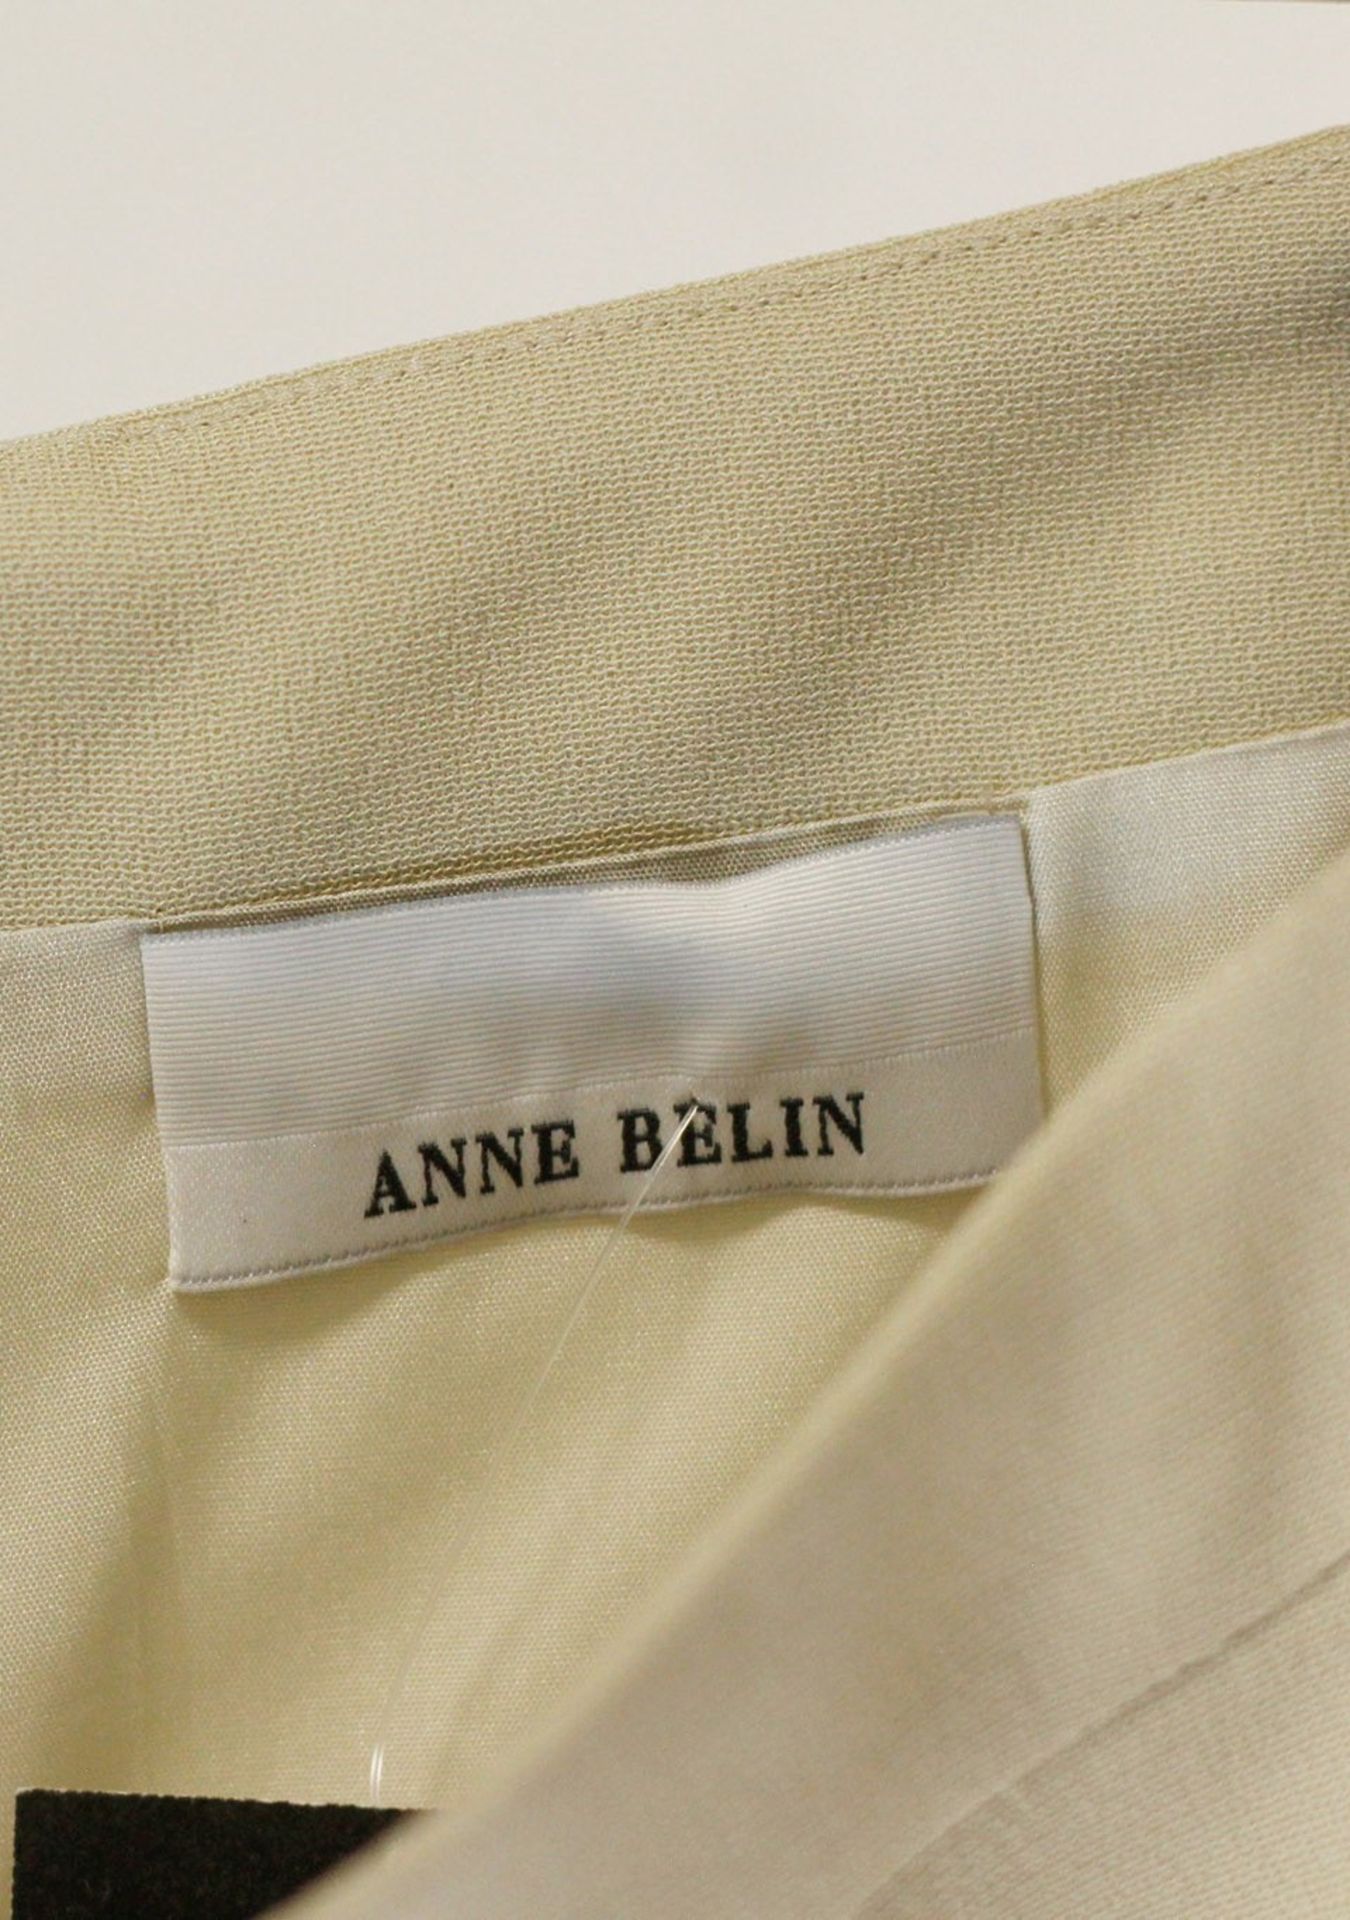 1 x Anne Belin Pistachio Skirt - Size: 20 - Material: 100% Polyester - From a High End Clothing - Image 3 of 12